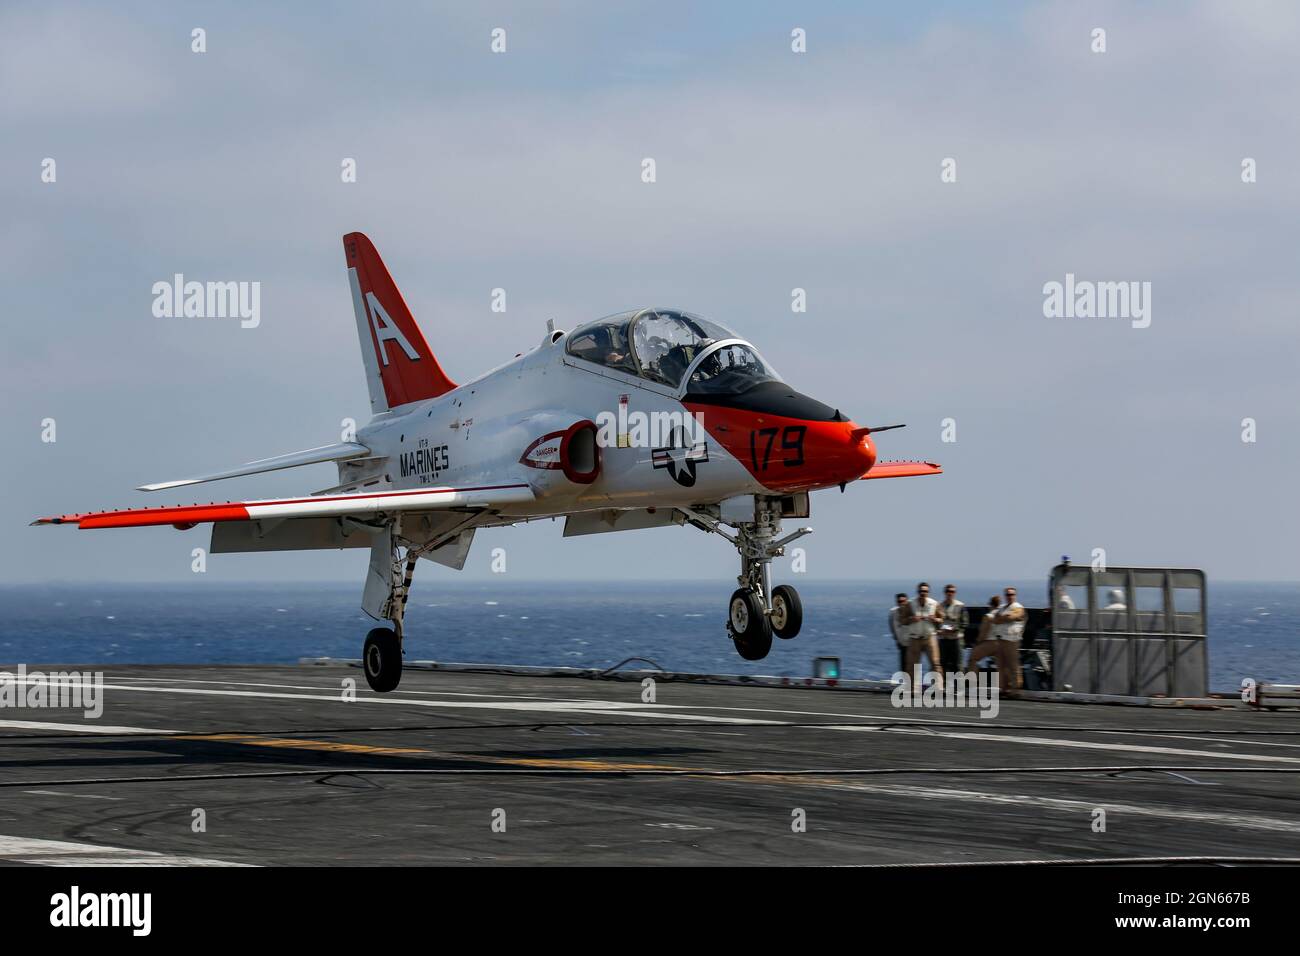 PACIFIC OCEAN (Aug. 29, 2021) A T-45C Goshawk, assigned to Training Air Wing 1 out of Naval Air Station Kingsville, Texas, performs a touch-and-go on the flight deck of the aircraft carrier USS Abraham Lincoln (CVN 72). Abraham Lincoln is underway conducting routine operations in the U.S. 3rd Fleet area of operations. (U.S. Navy photo by Mass Communication Specialist 3rd Class Michael Singley/Released) Stock Photo